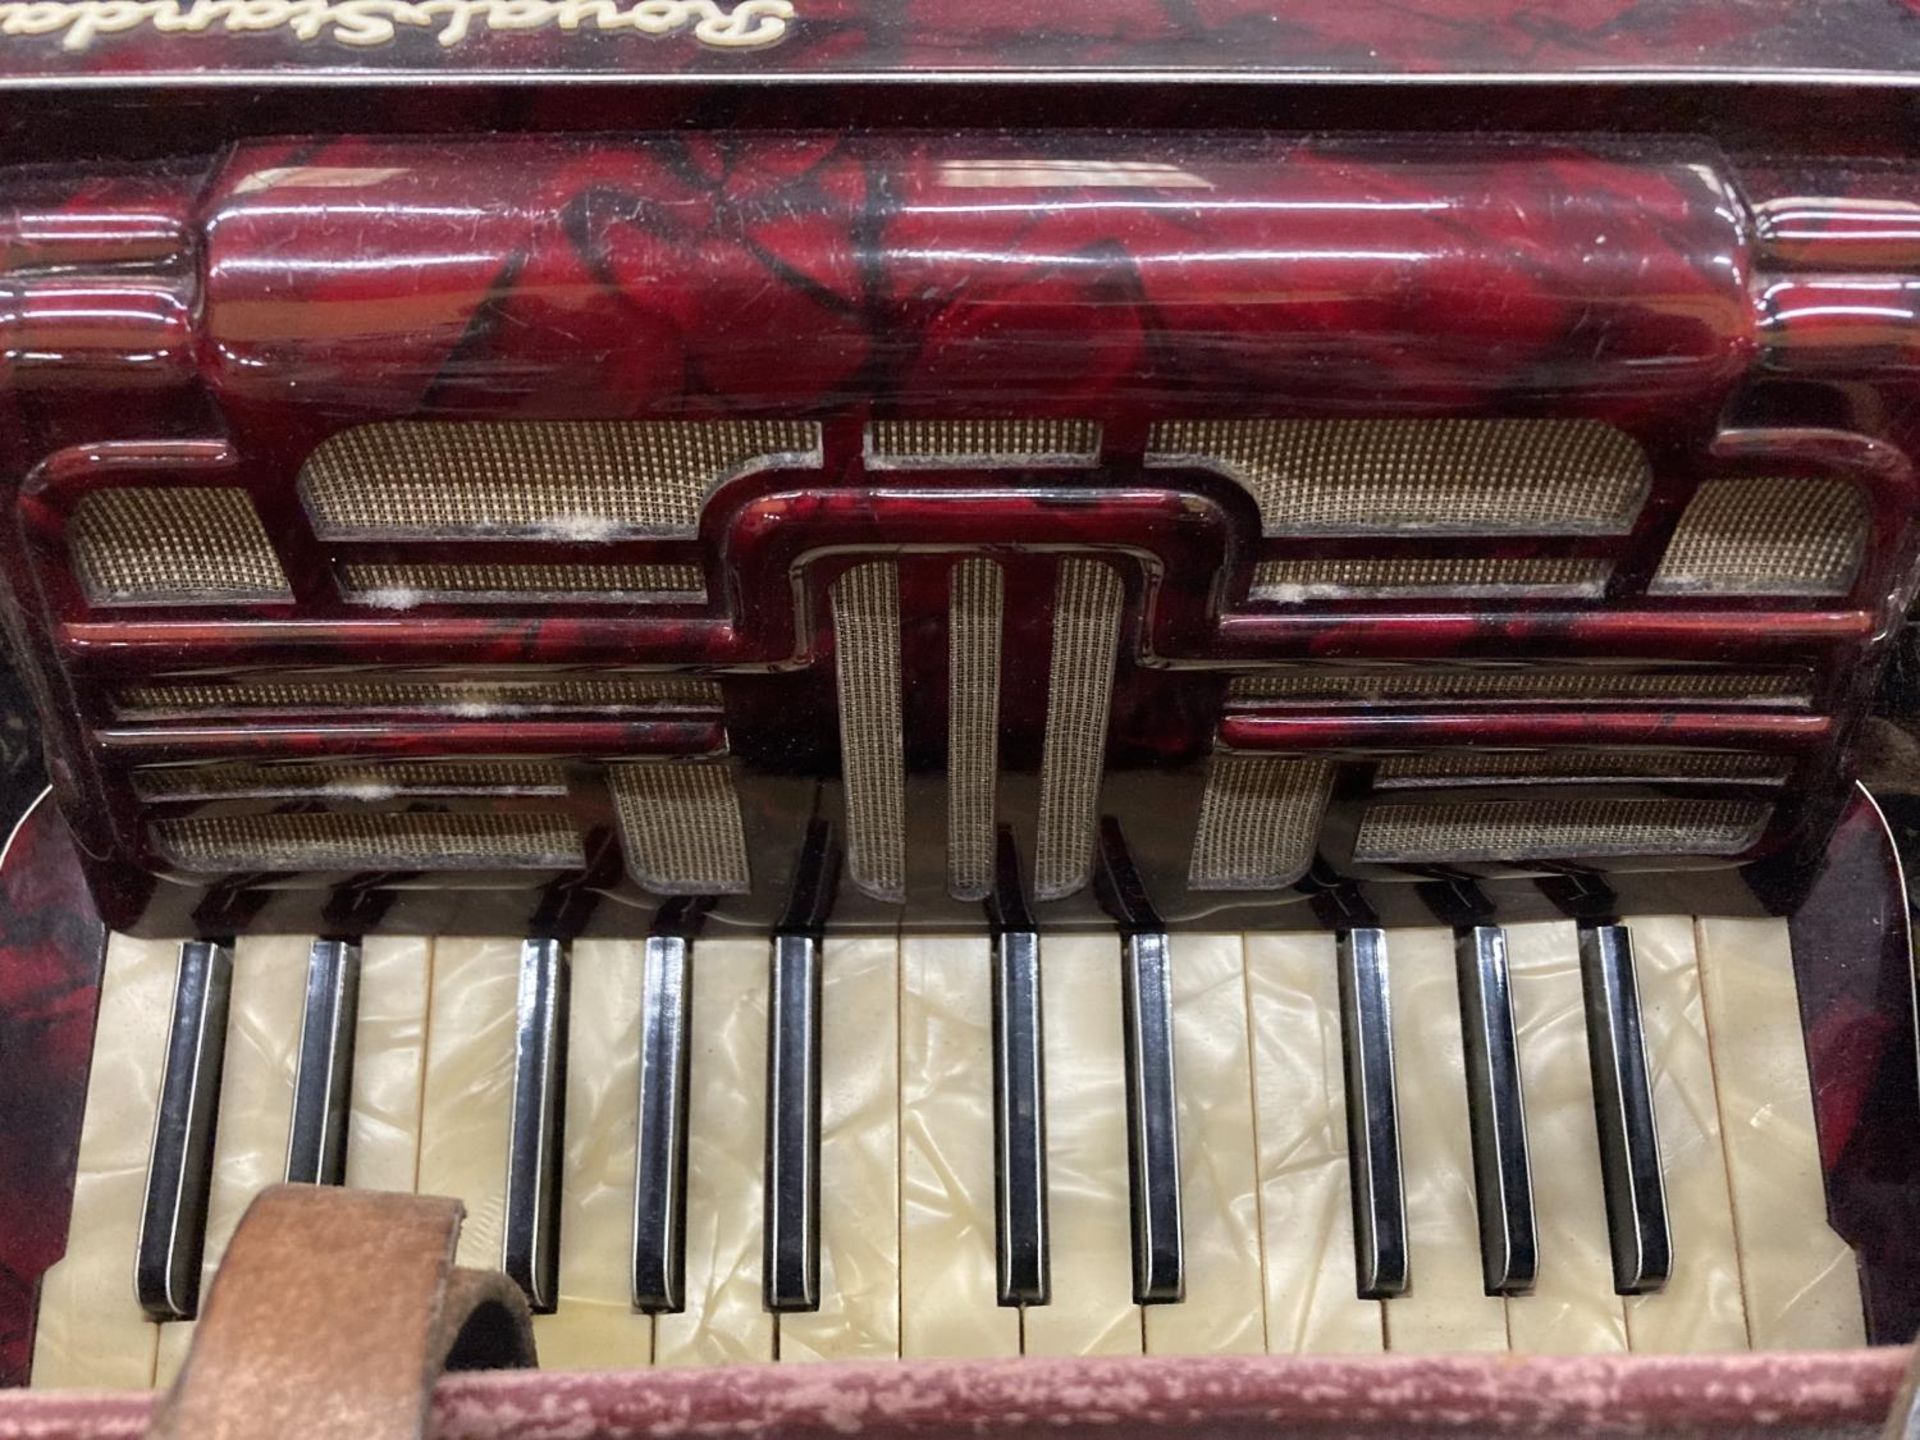 A VINTAGE ROYAL STANDARD ACCORDIAN WITH RED BAKELITE BODY IN THE ORIGINAL CASE - Image 2 of 4